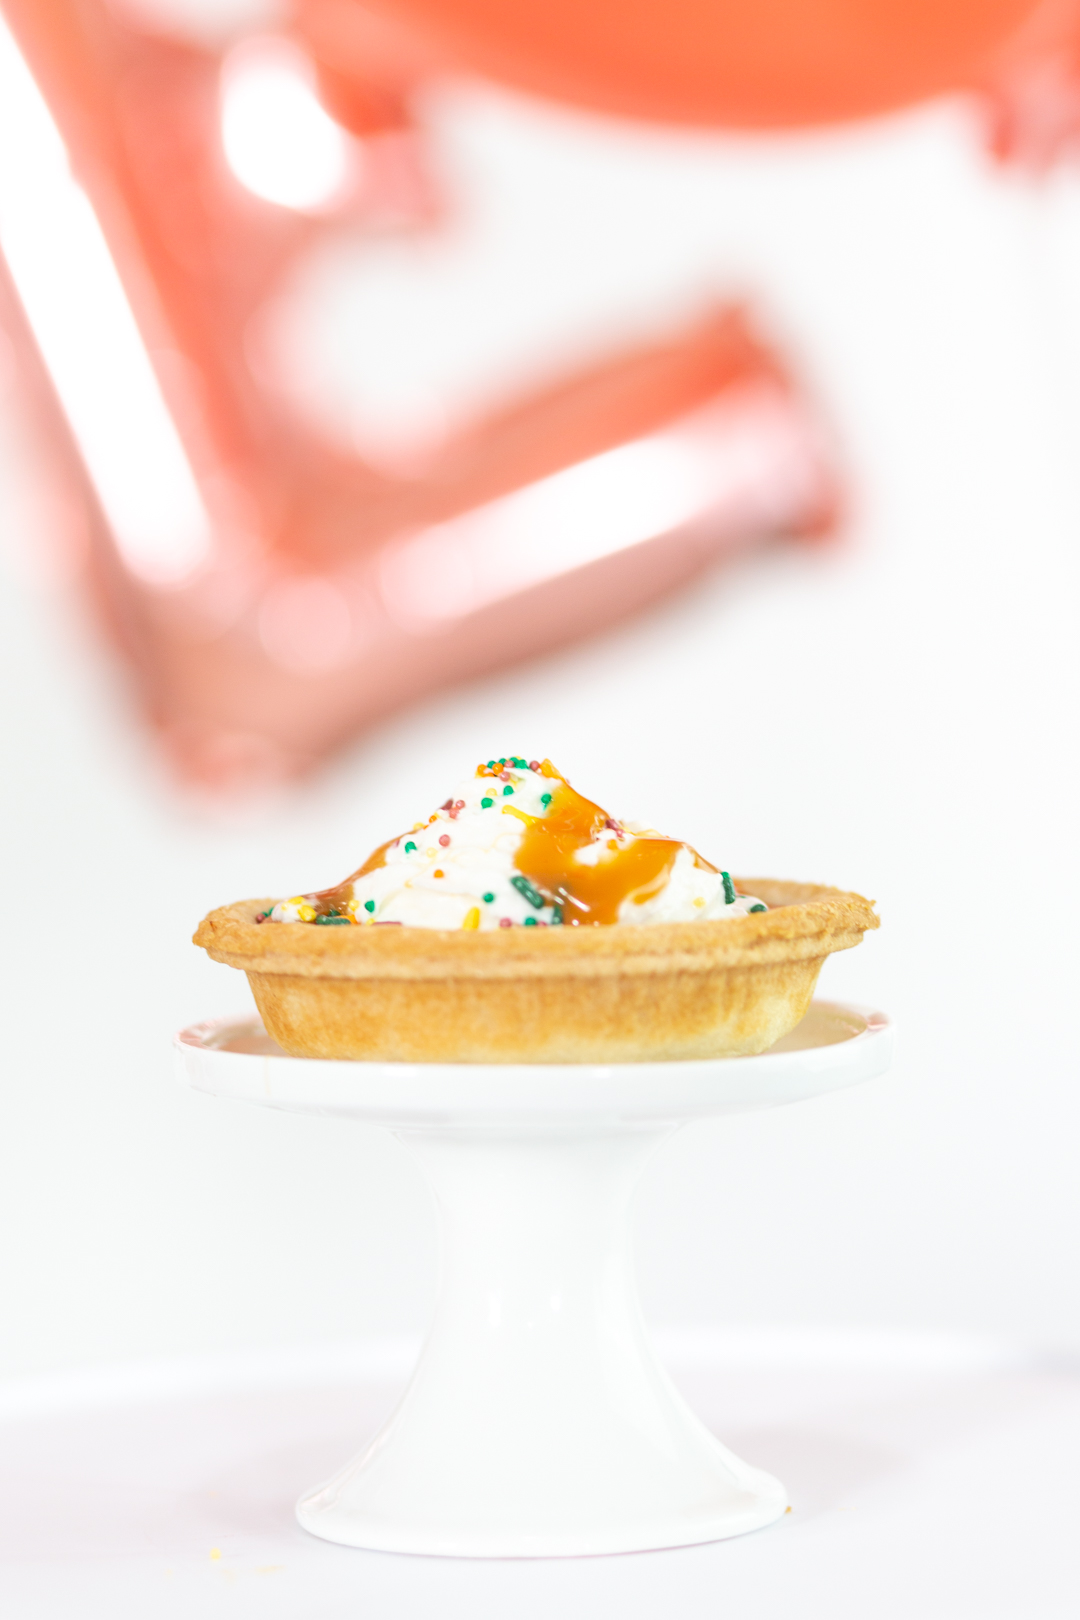 mini pumpkin pie with whipped cream, caramel and fall sprinkles